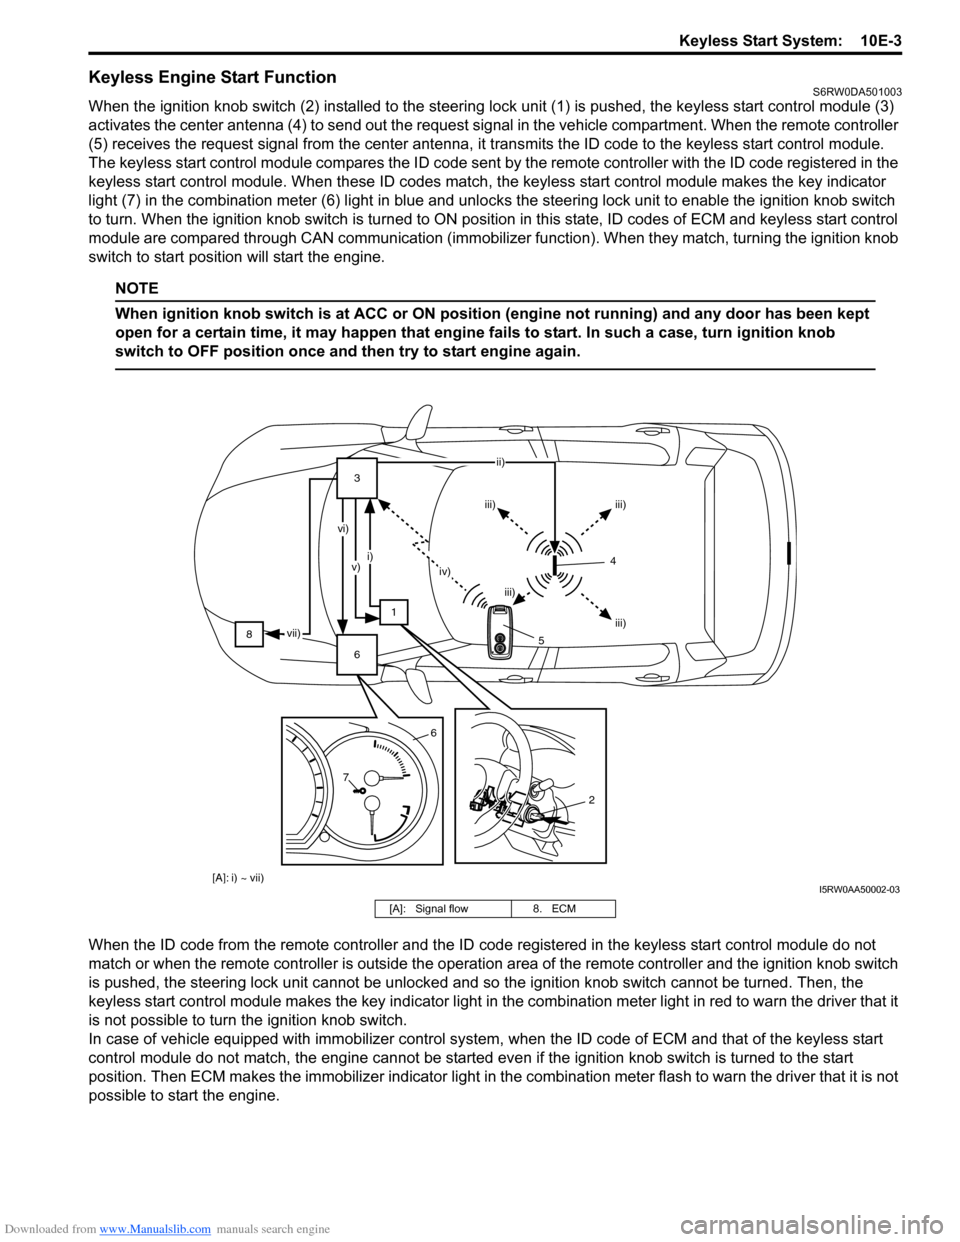 SUZUKI SX4 2006 1.G Service Workshop Manual Downloaded from www.Manualslib.com manuals search engine Keyless Start System:  10E-3
Keyless Engine Start FunctionS6RW0DA501003
When the ignition knob switch (2) installed to the steering lock unit (